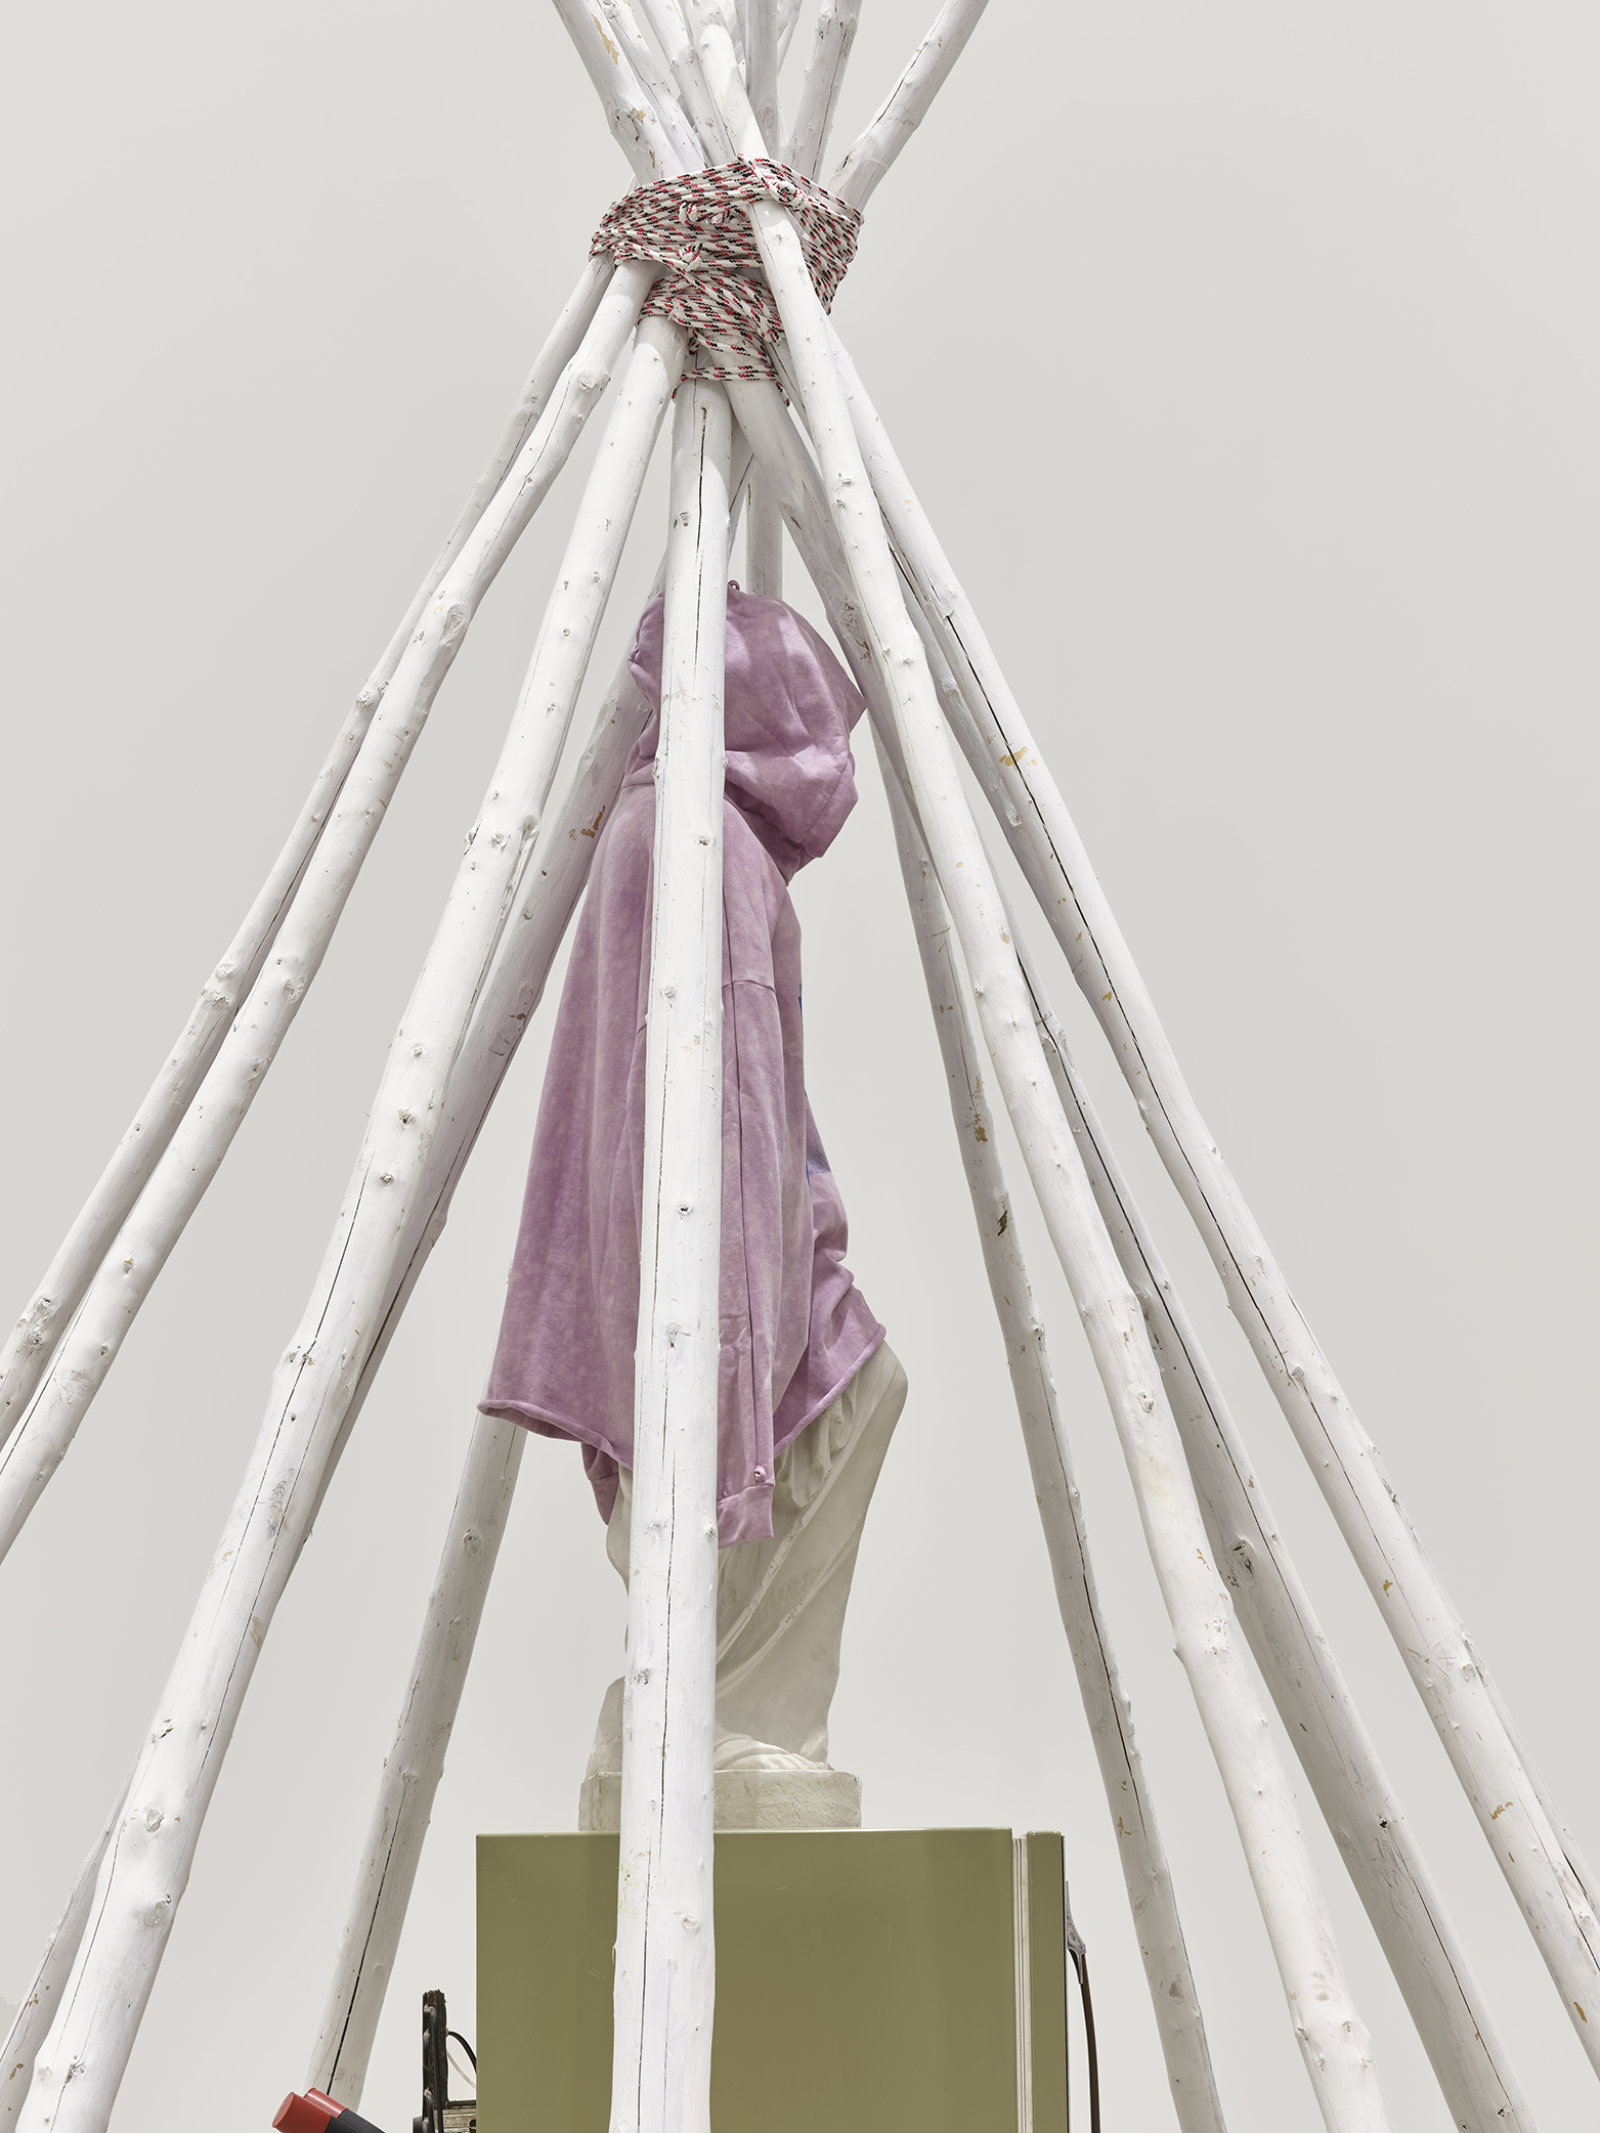 Duane Linklater, what grief conjures (detail), 2020, tipi poles, paint, nylon rope, wooden pallet, refrigerator, tie-down straps, hand truck, plastic statue, handmade hoodie, cochineal dye, silkscreen, 249 x 160 x 160 in. (632 x 406 x 406 cm)